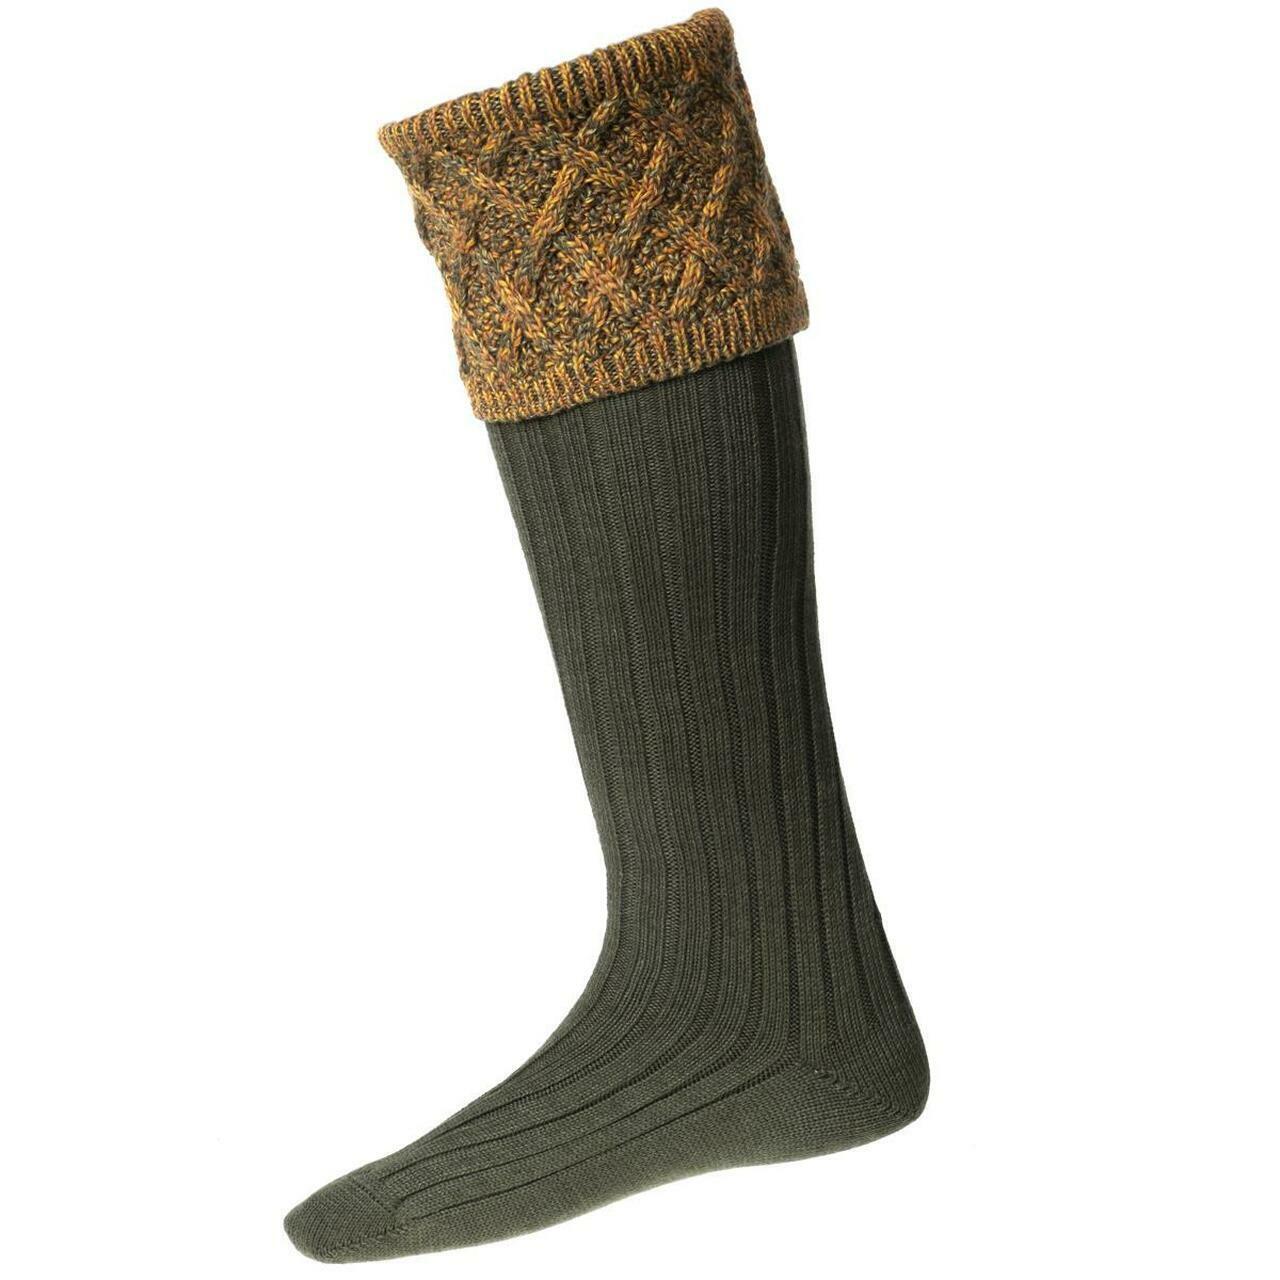 House of Cheviot Forres Socks - Spruce